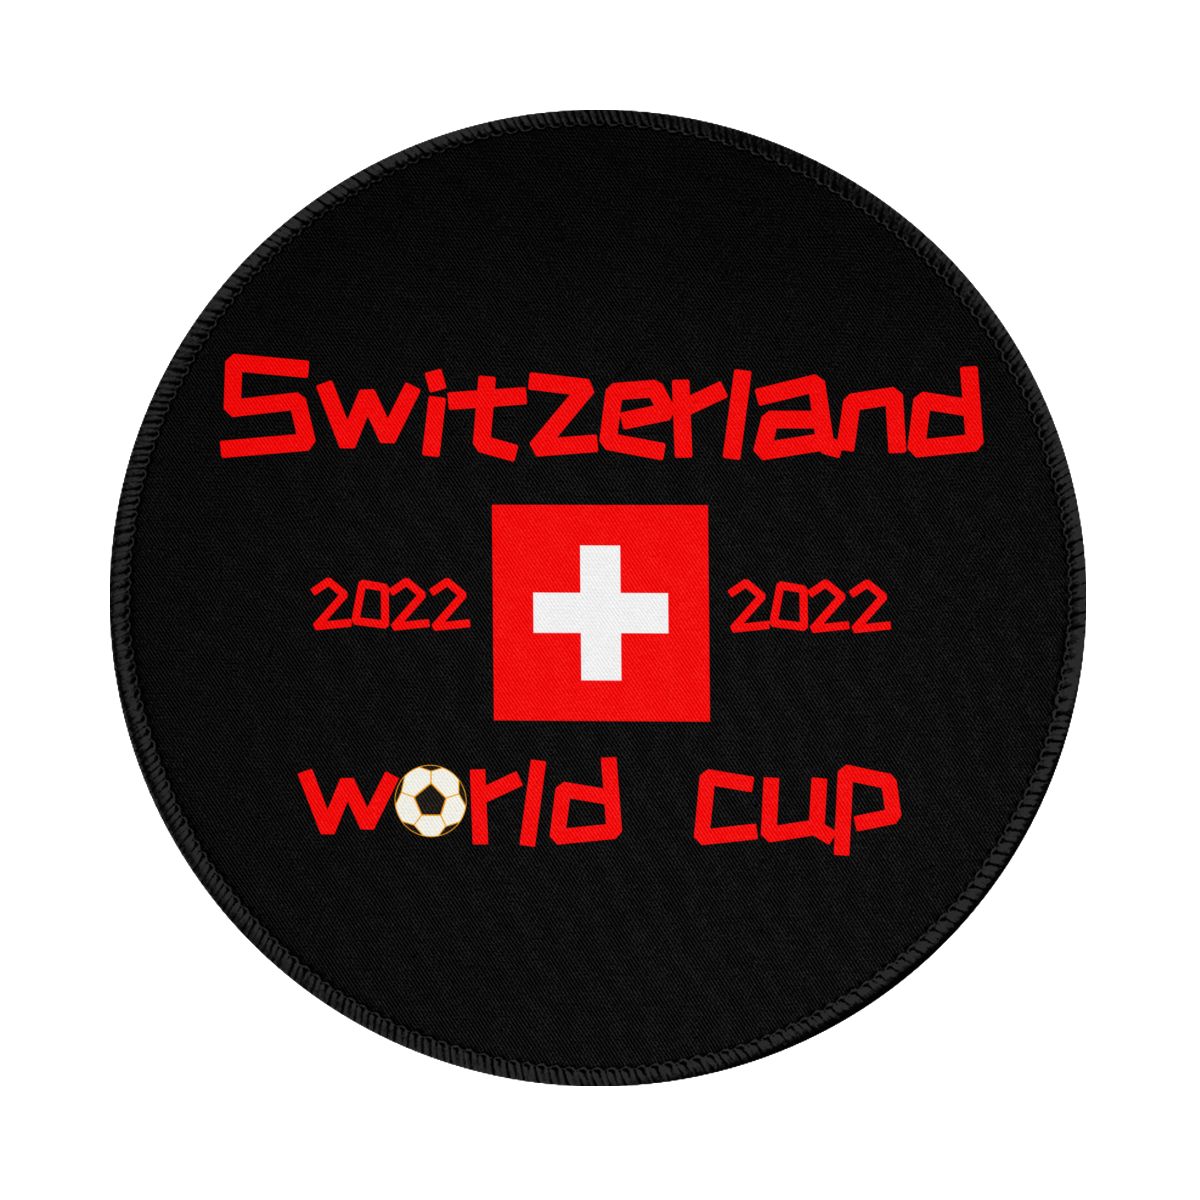 Switzerland 2022 World Cup Team Logo Round Non-Slip Thick Rubber Modern Gaming Mousepad